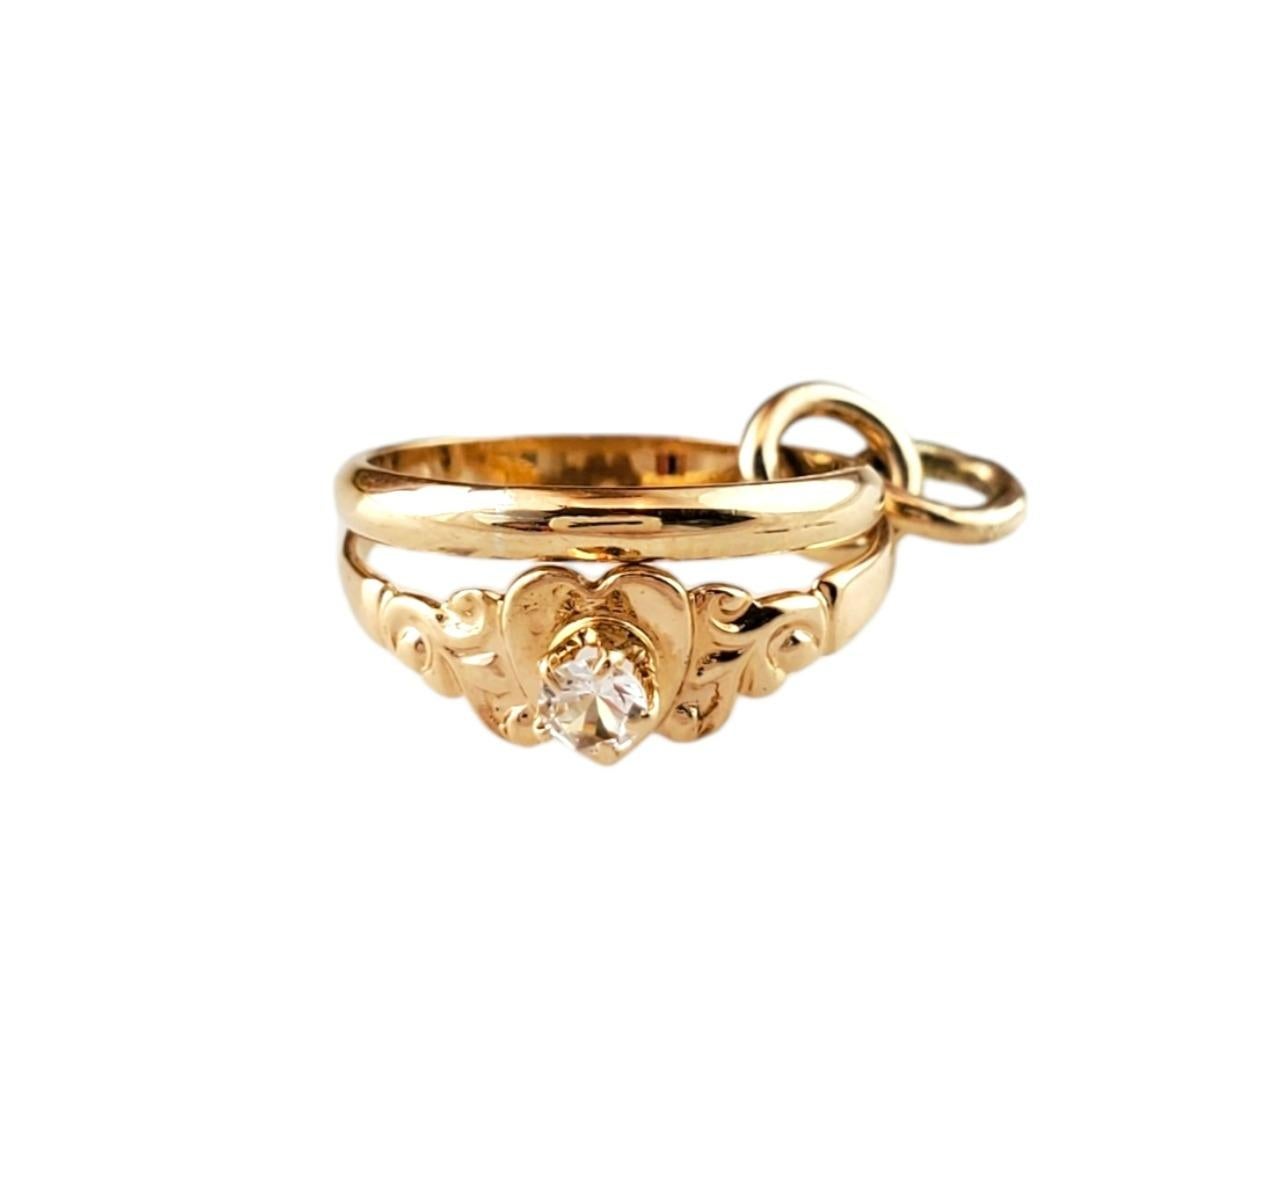 Vintage 14K Yellow Gold Mini Engagement Ring & Wedding Band Charm - 

This lovely wedding band charm features intertwined rings that symbolize eternal unity. 

Size: 20.95mm X 15.9mm

Weight: 0.8 dwt/ 1.3 g

Hallmark: 14K

Very good condition,